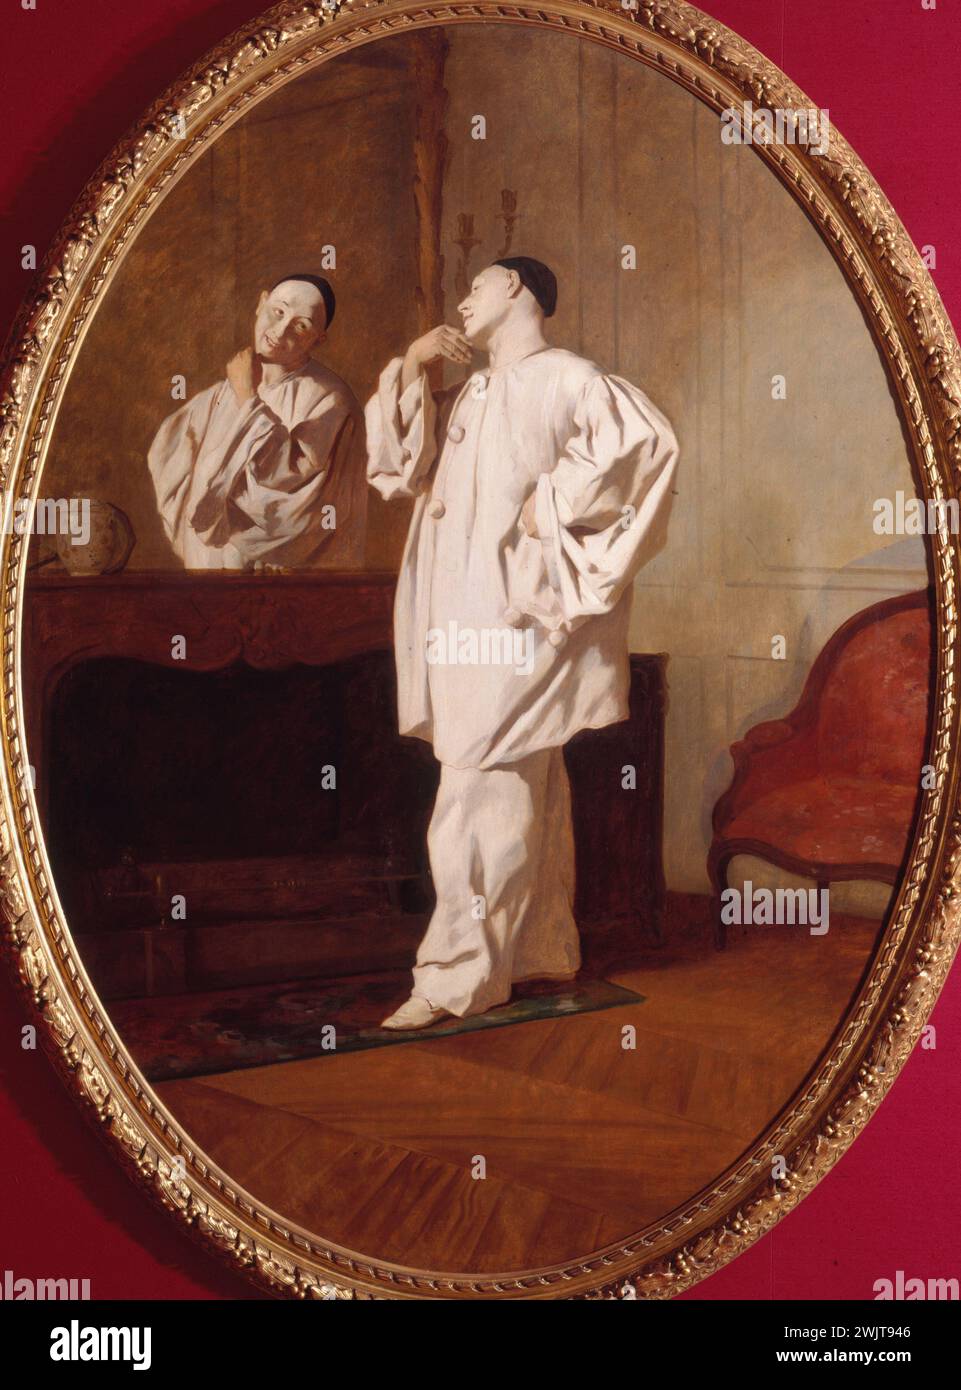 Jean Pezous (1815-1885). 'The Mime Charles Debureau (1829-1873) in Pierrot costume'. Oil on canvas. Paris, Carnavalet museum. 35303-8 Costume, disguise, French mime, mirror, pierrot, portrait, reflection, habit, oil on canvas Stock Photo